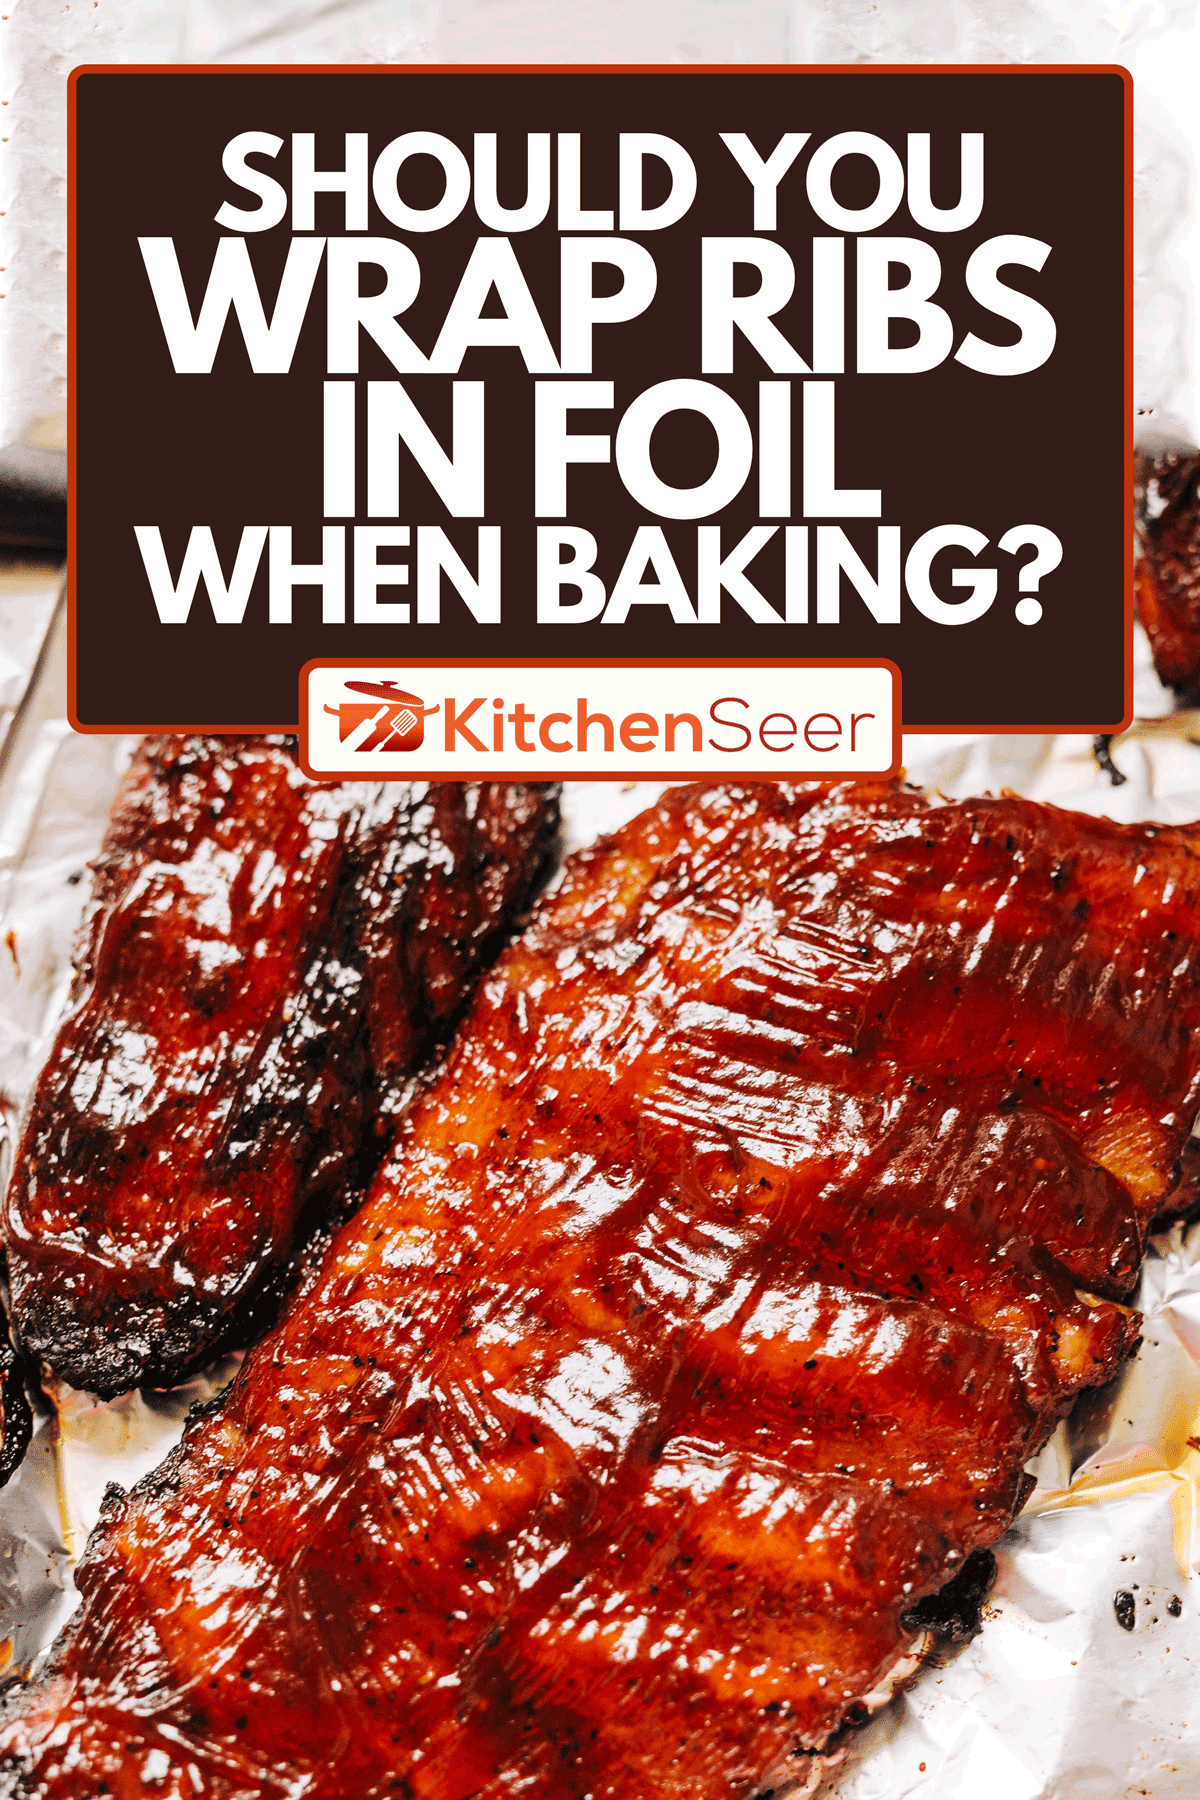 A ribs glazed with sauce on aluminum foil, Should You Wrap Ribs in Foil When Baking?